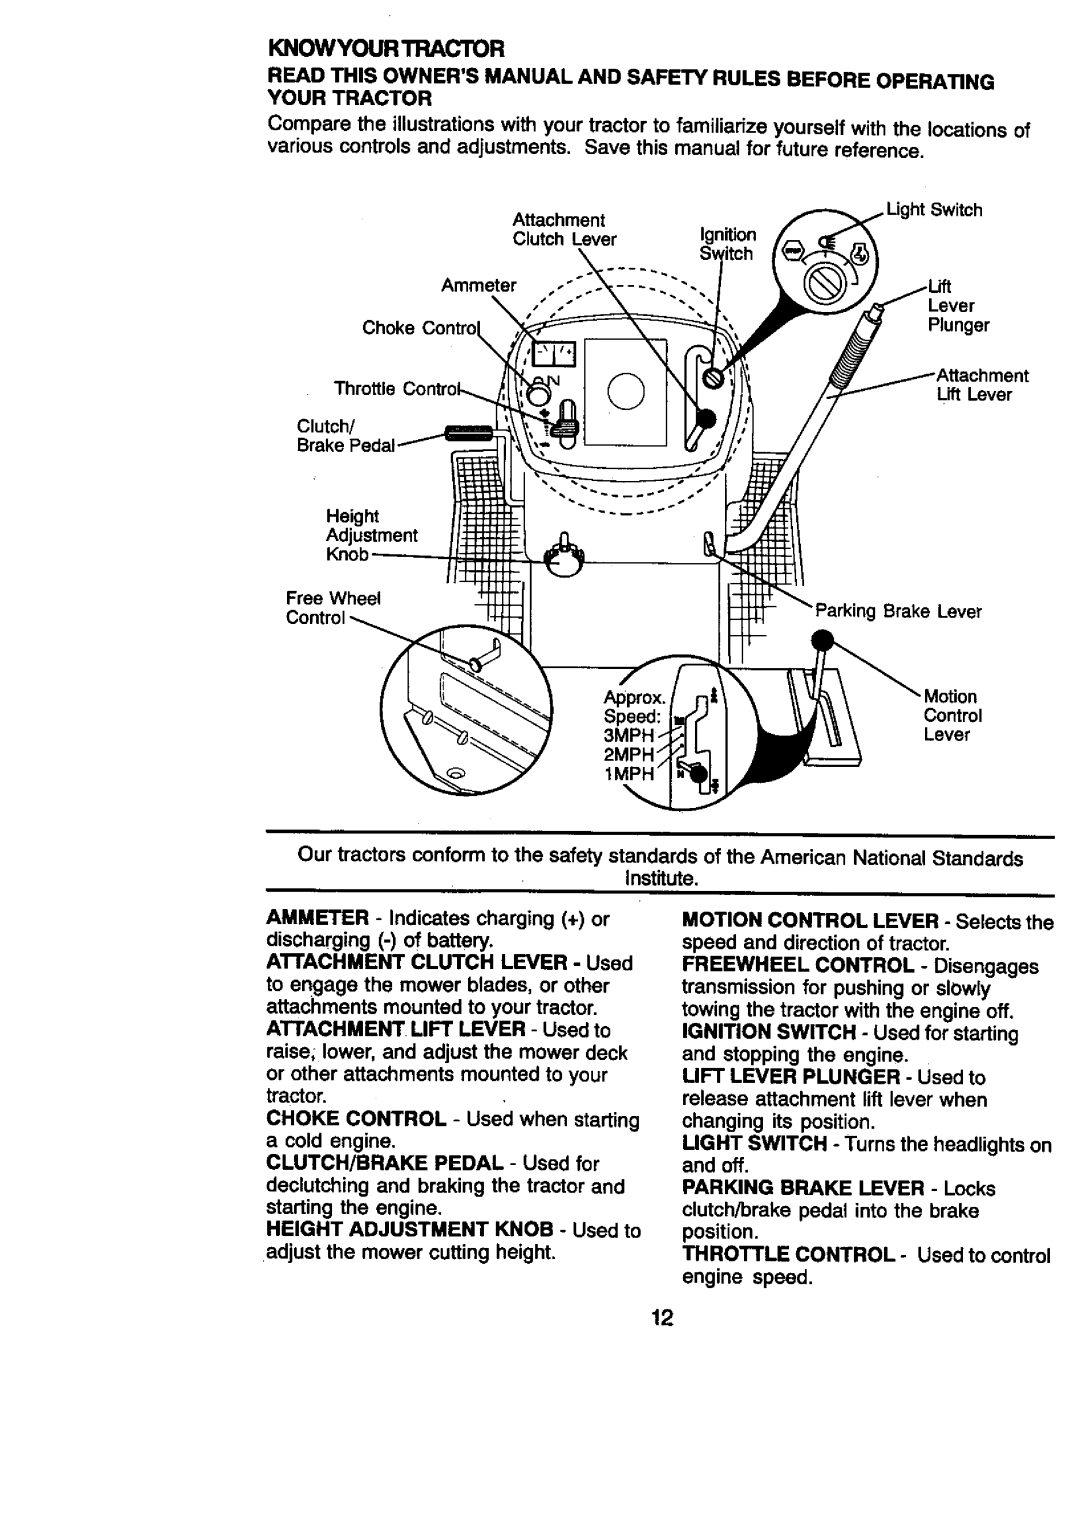 Craftsman 917.27086 manual Knowyour Tractor 